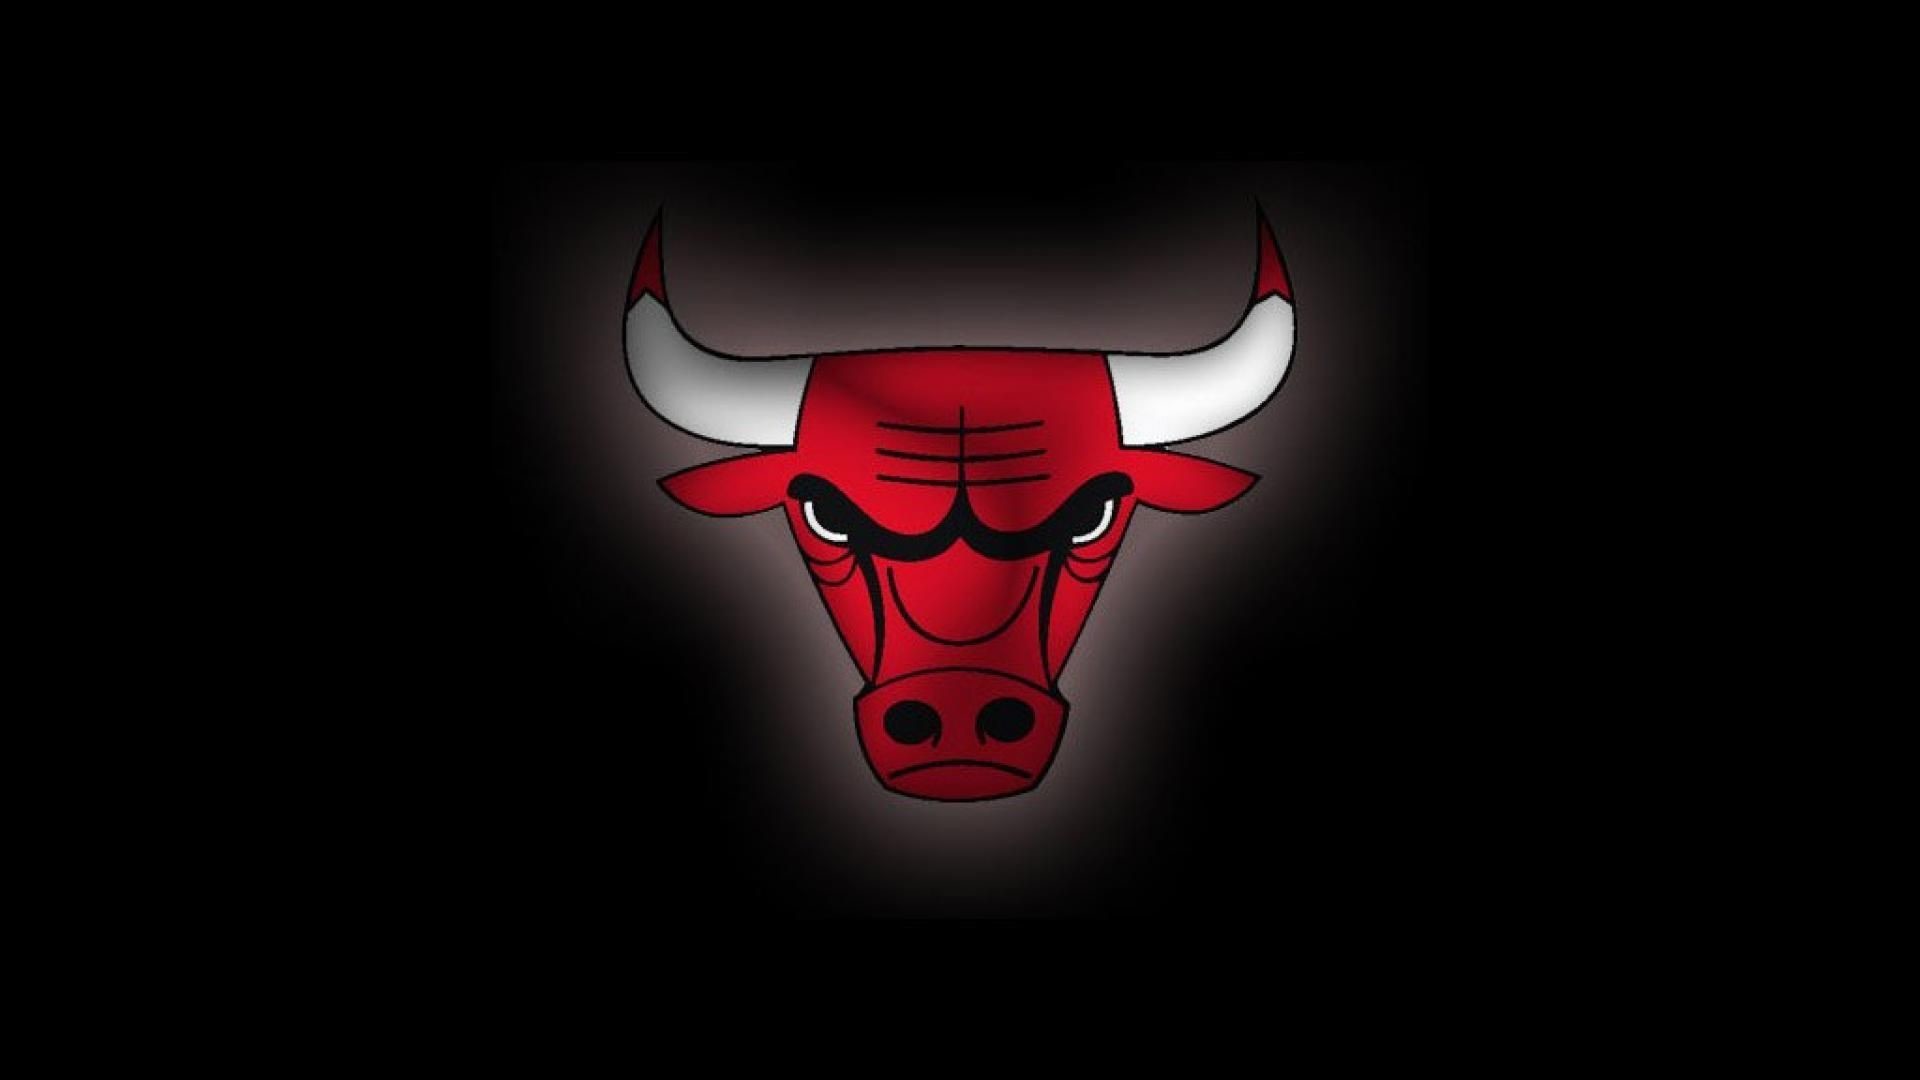 Chicago bulls basketball wallpapers – – High Quality and